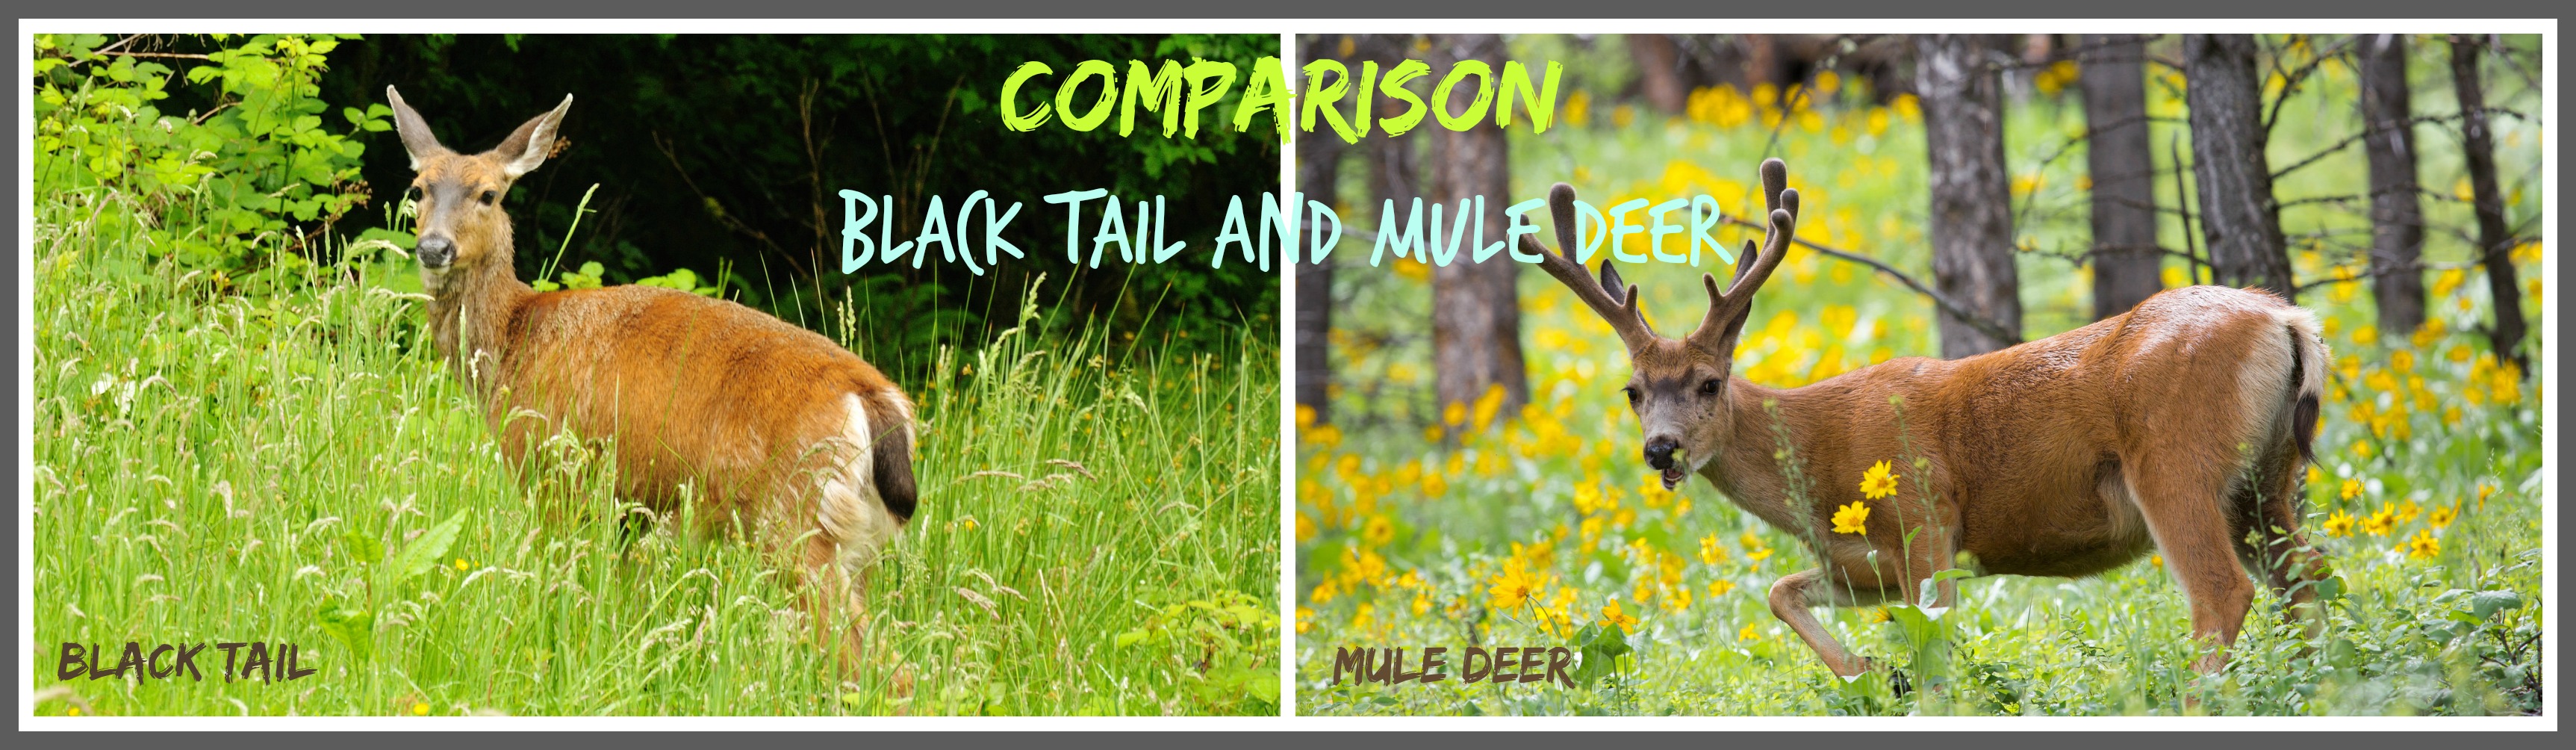 Comparison: Black Tail and Mule Deer - Good Game Hunting